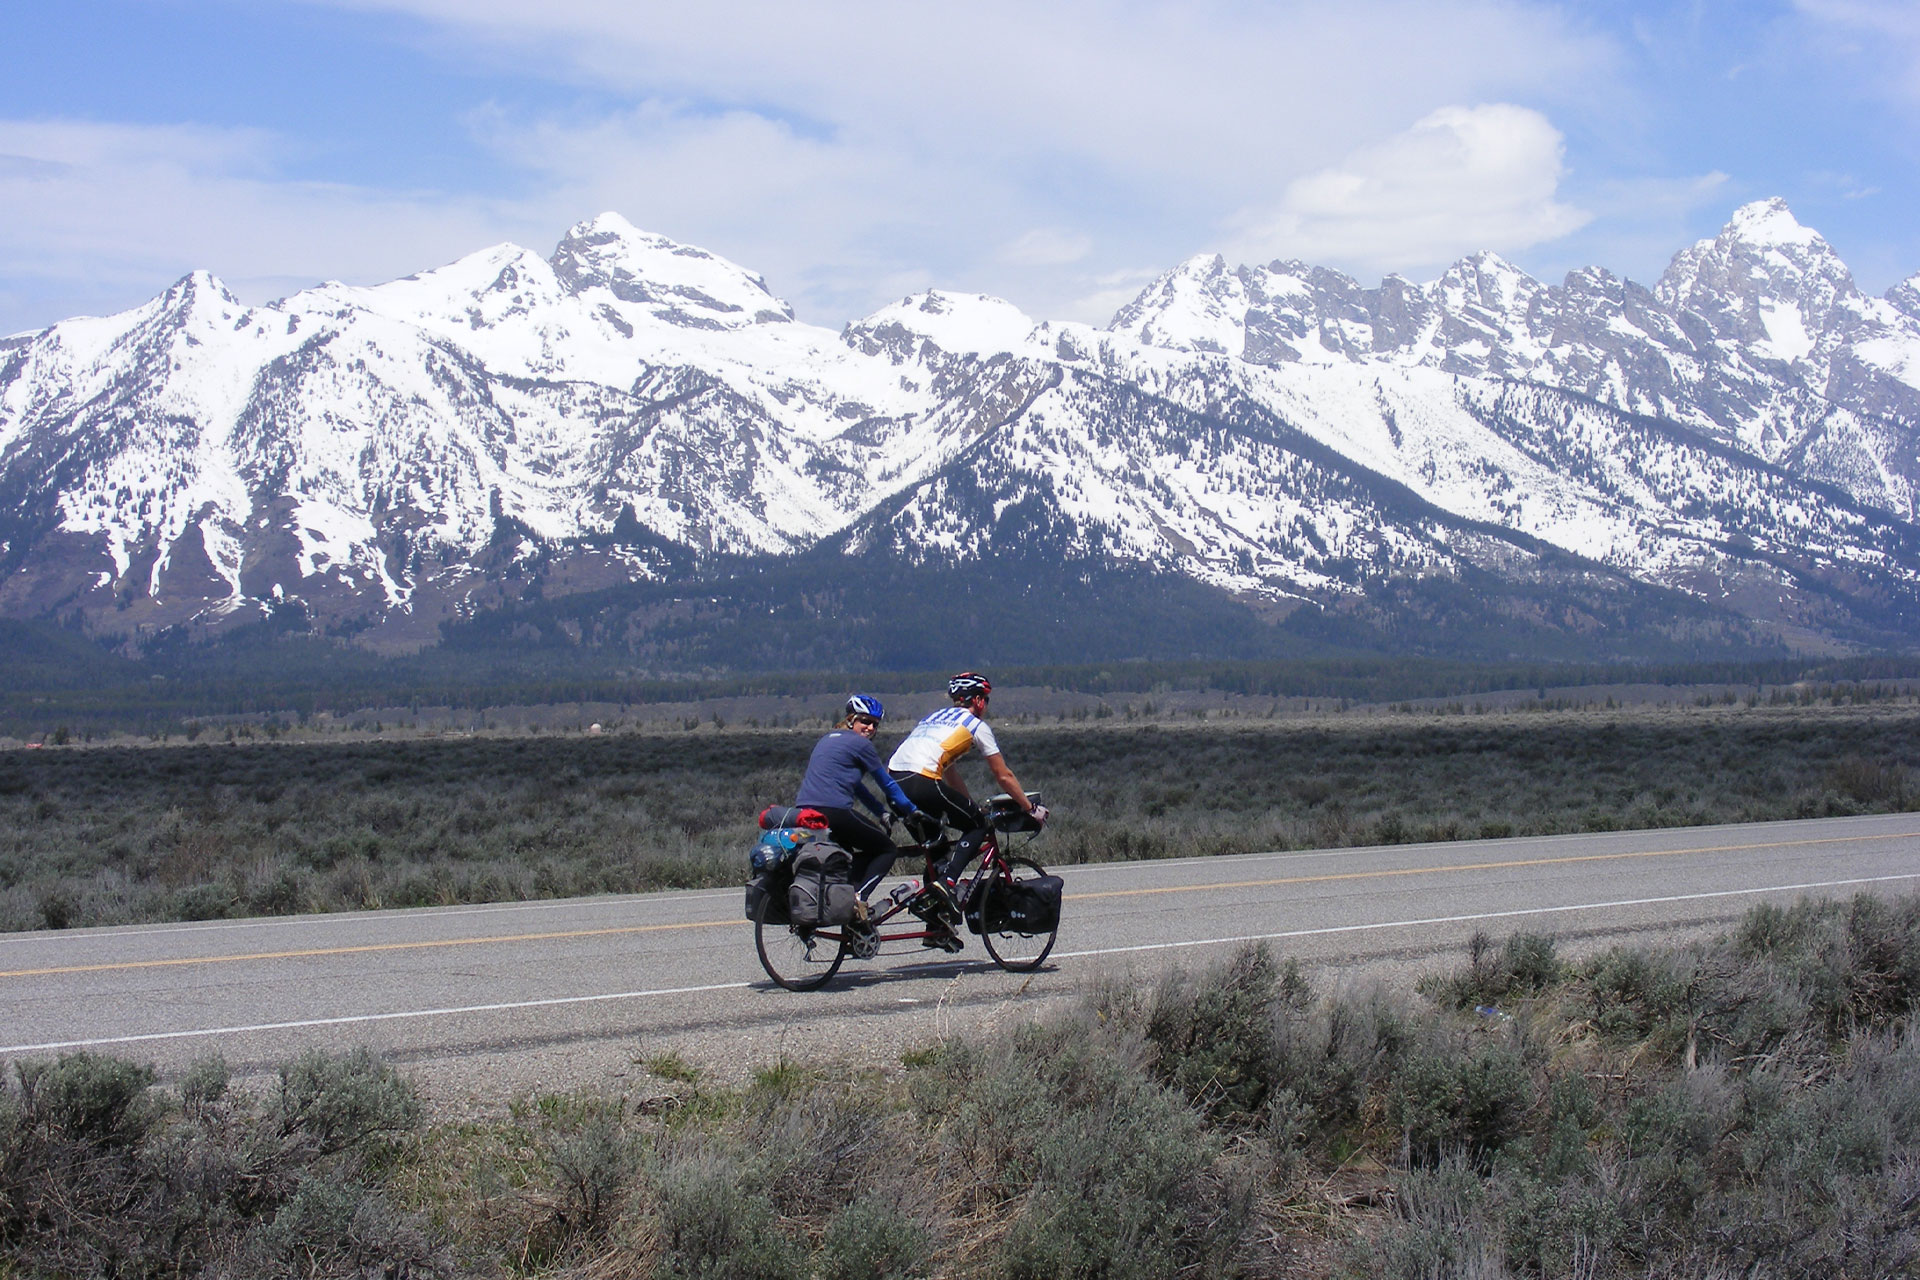 Holly Tuppen and her partner on a tandem bike with snow capped mountains in the background.